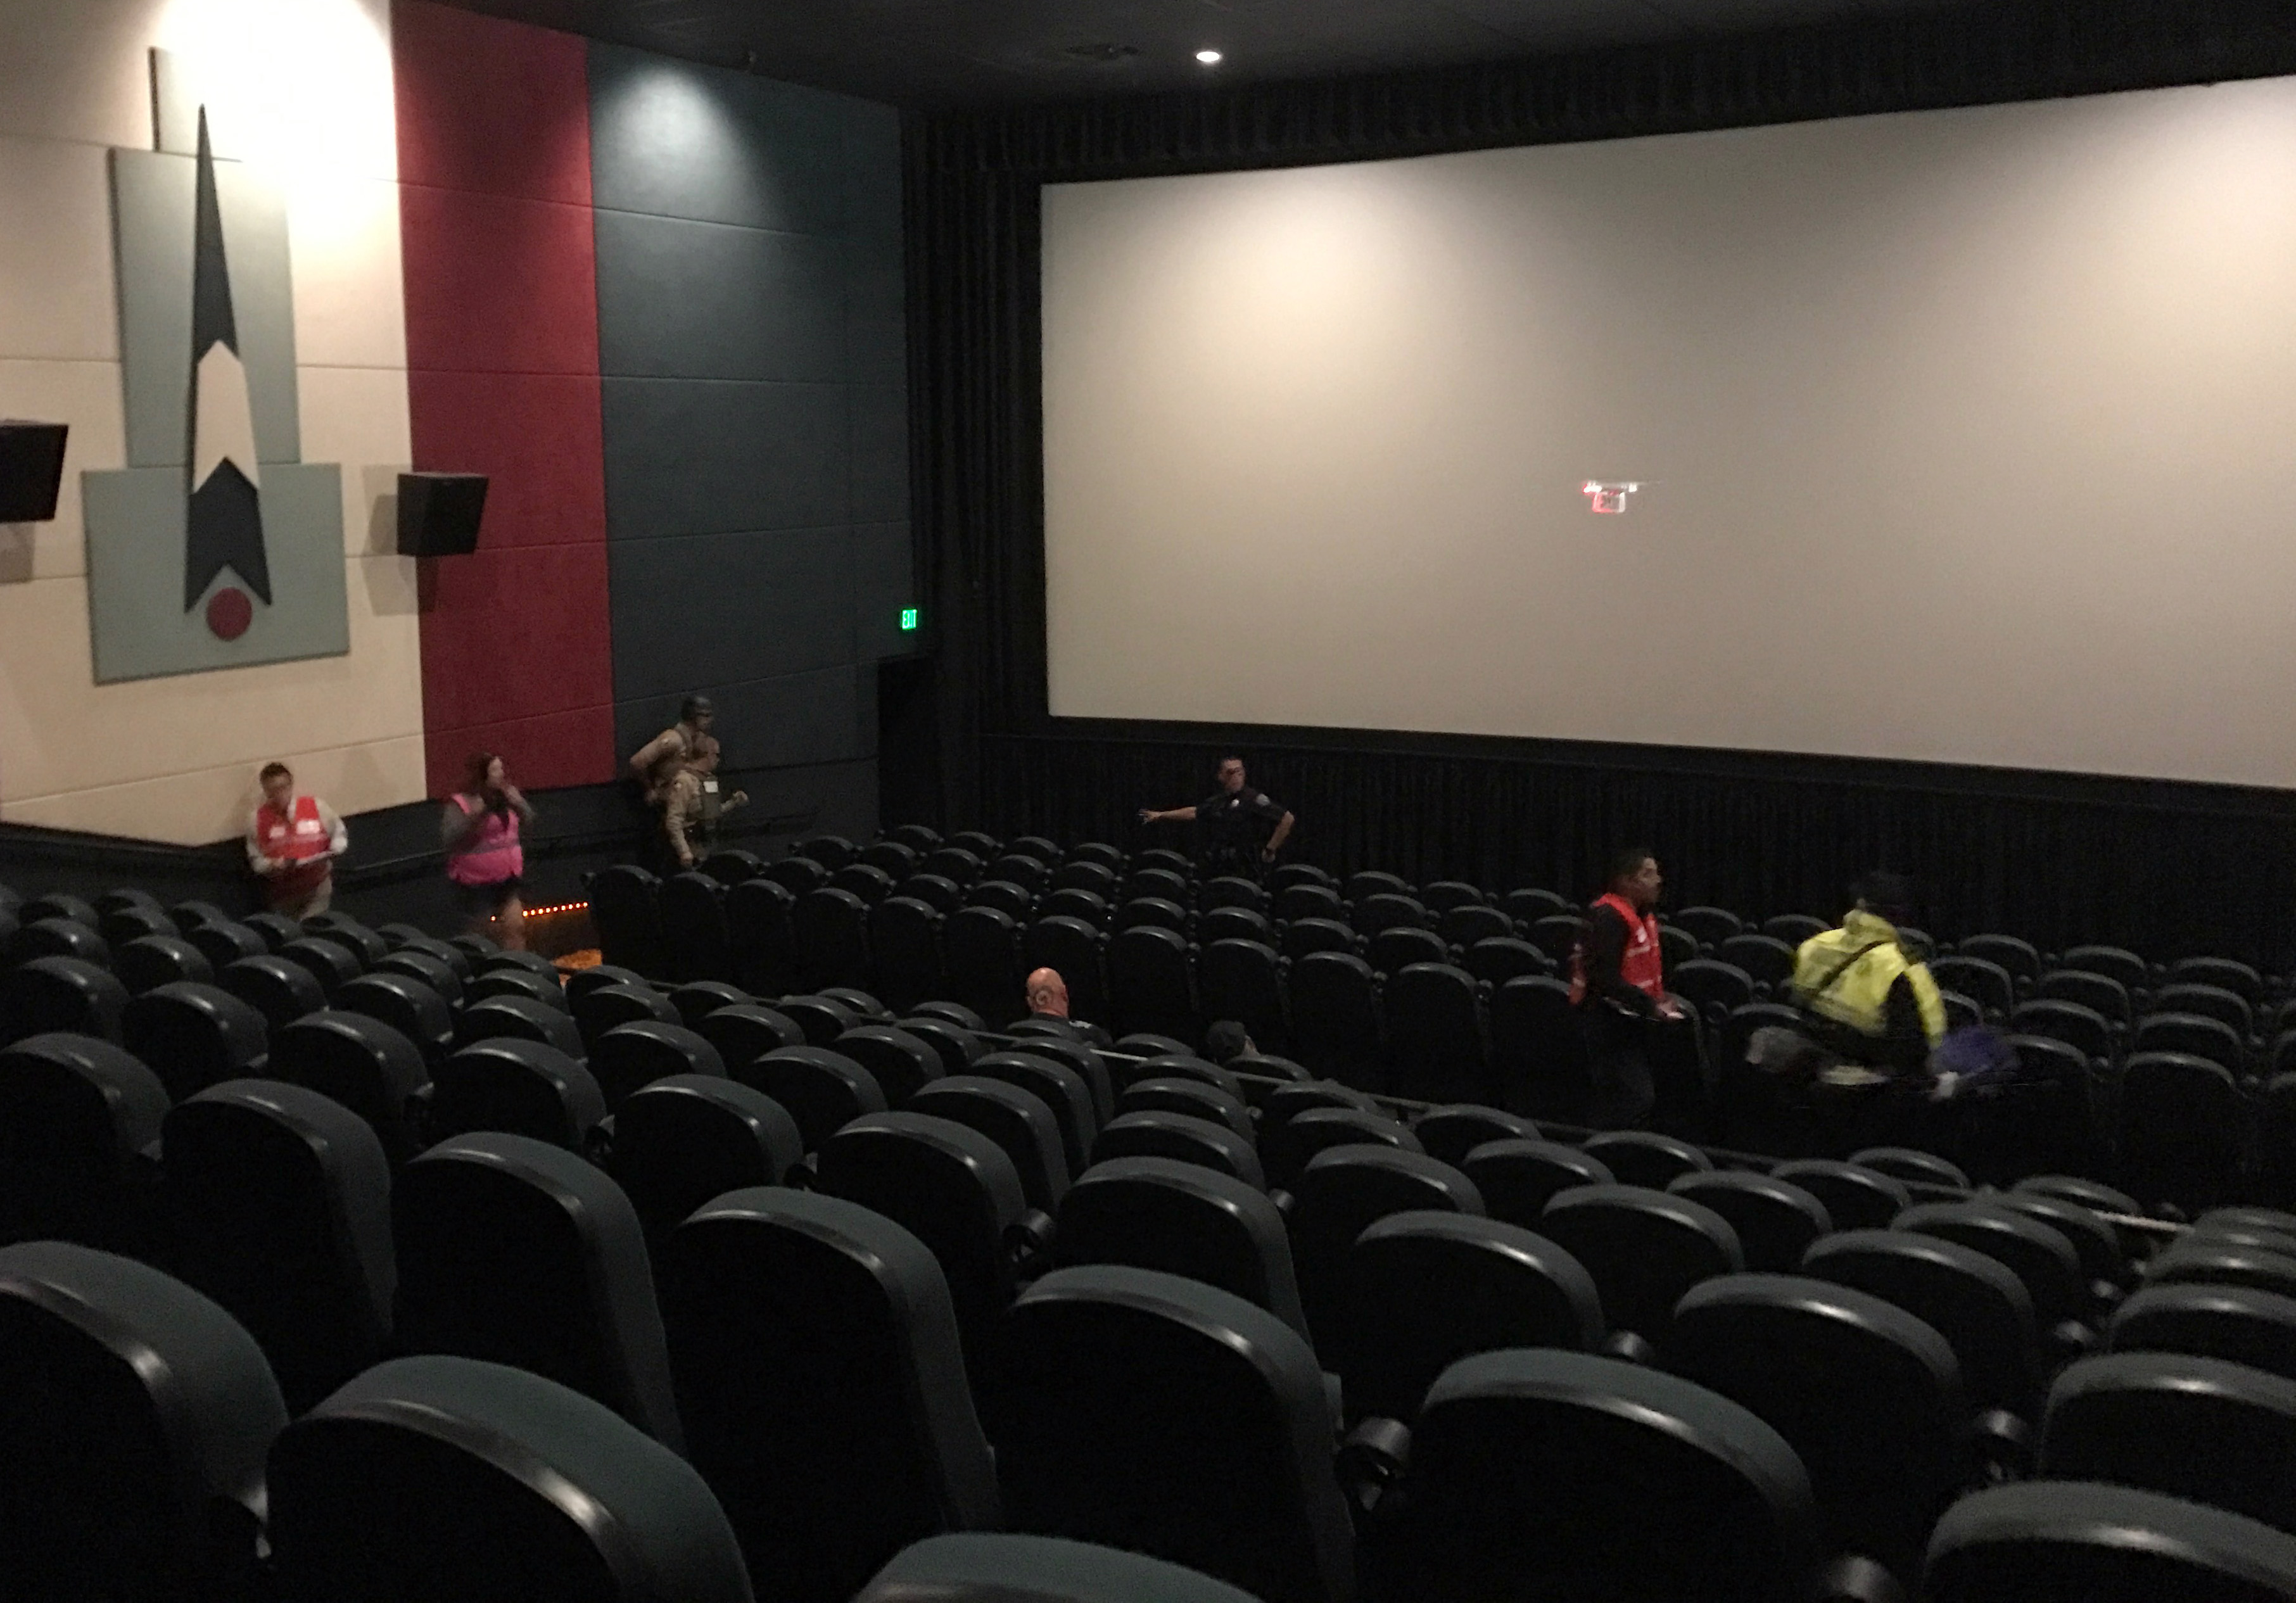 A drone flies in front of the movie screen during the active shooter drill at Premiere Cinemas in Hollister.